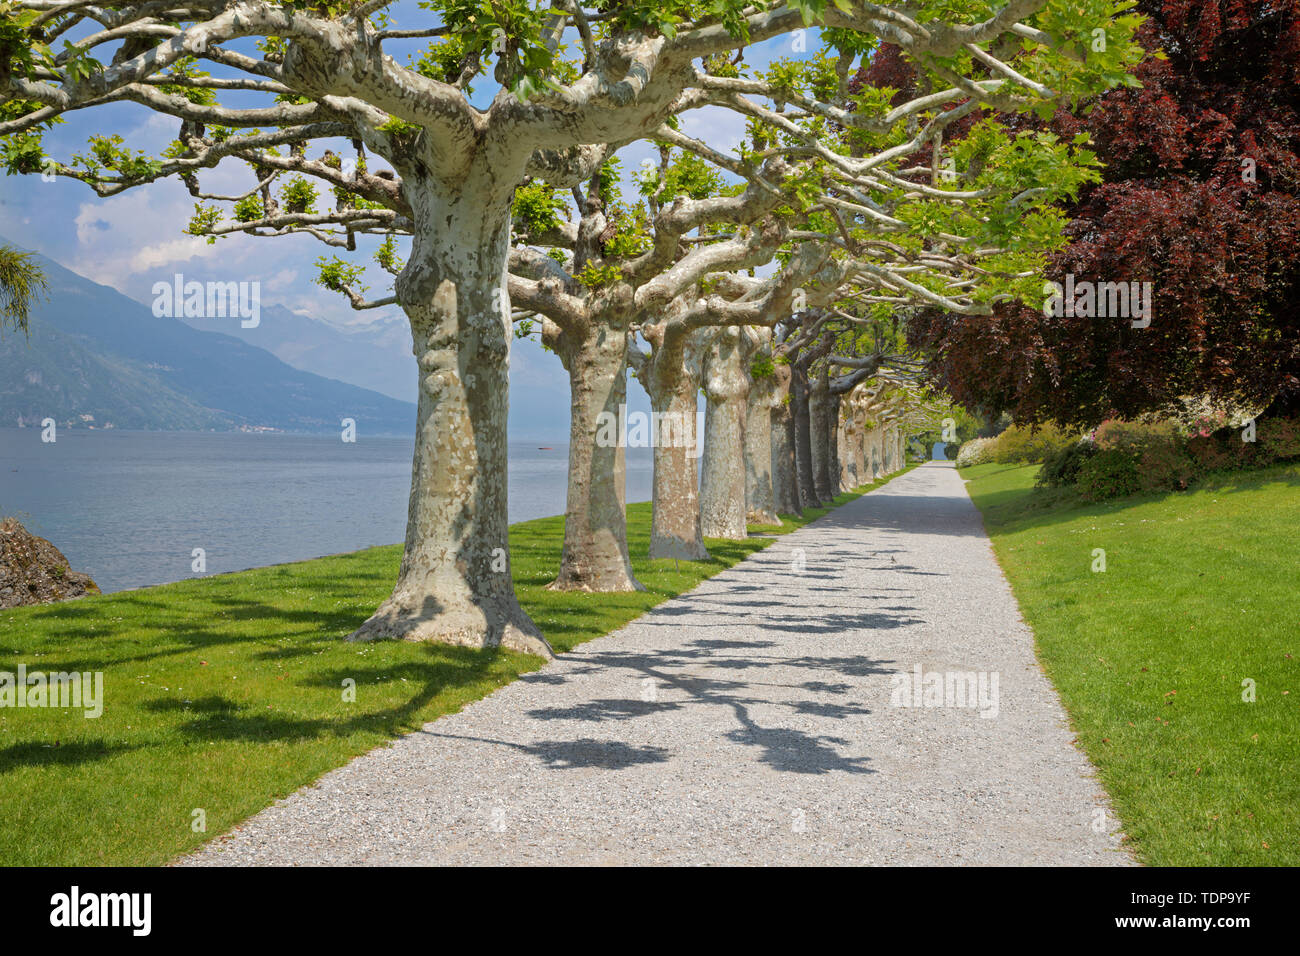 BELAGGIO, ITALY - MAY 10, 2015: The Villa Melzi on the waterfront of Como lake and the gardens. Stock Photo